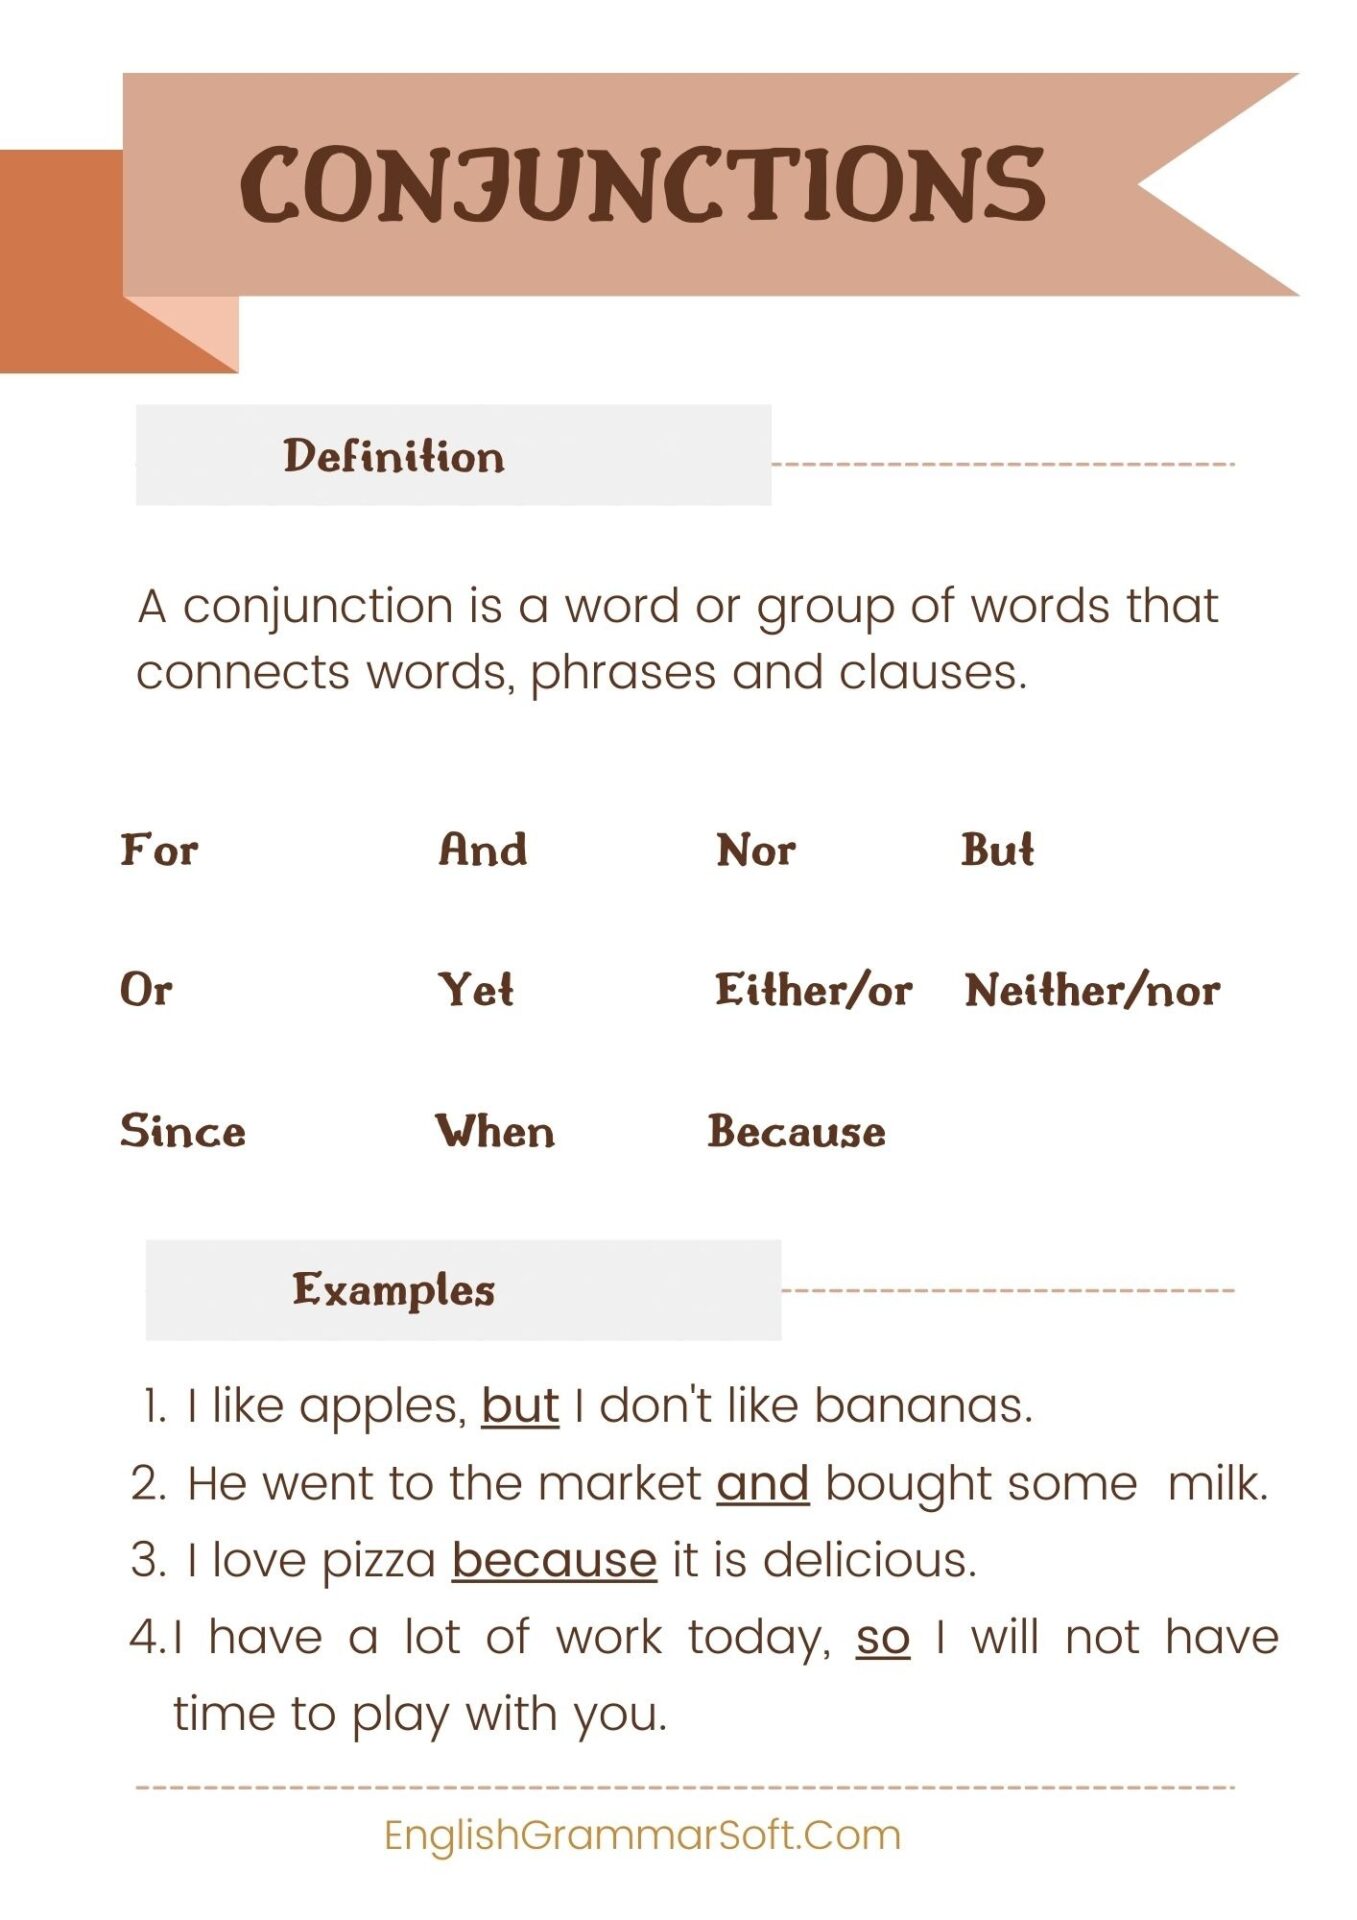 Free Parts of Speech Posters (Conjunction)